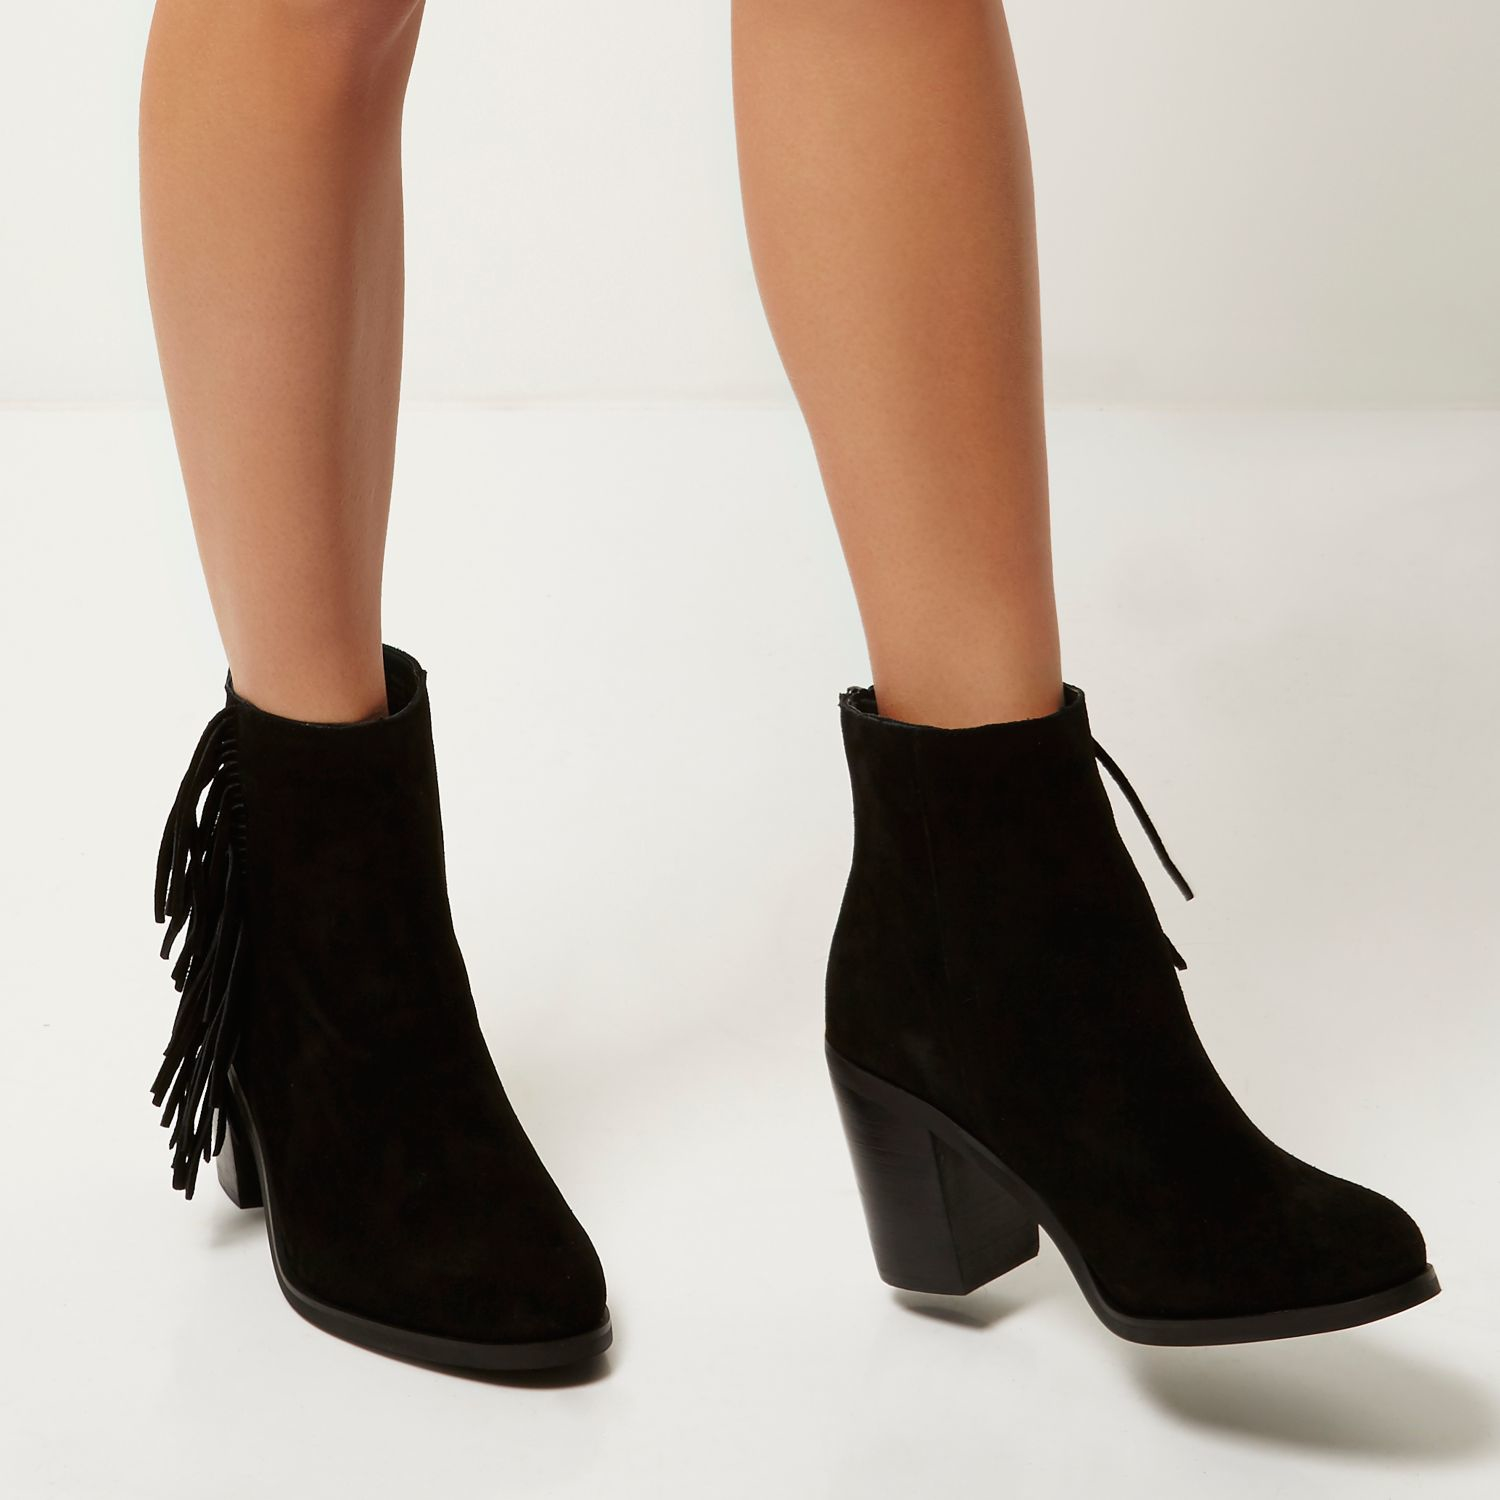 River Island Black Black Suede Fringed Ankle Boots Product 1 088351149